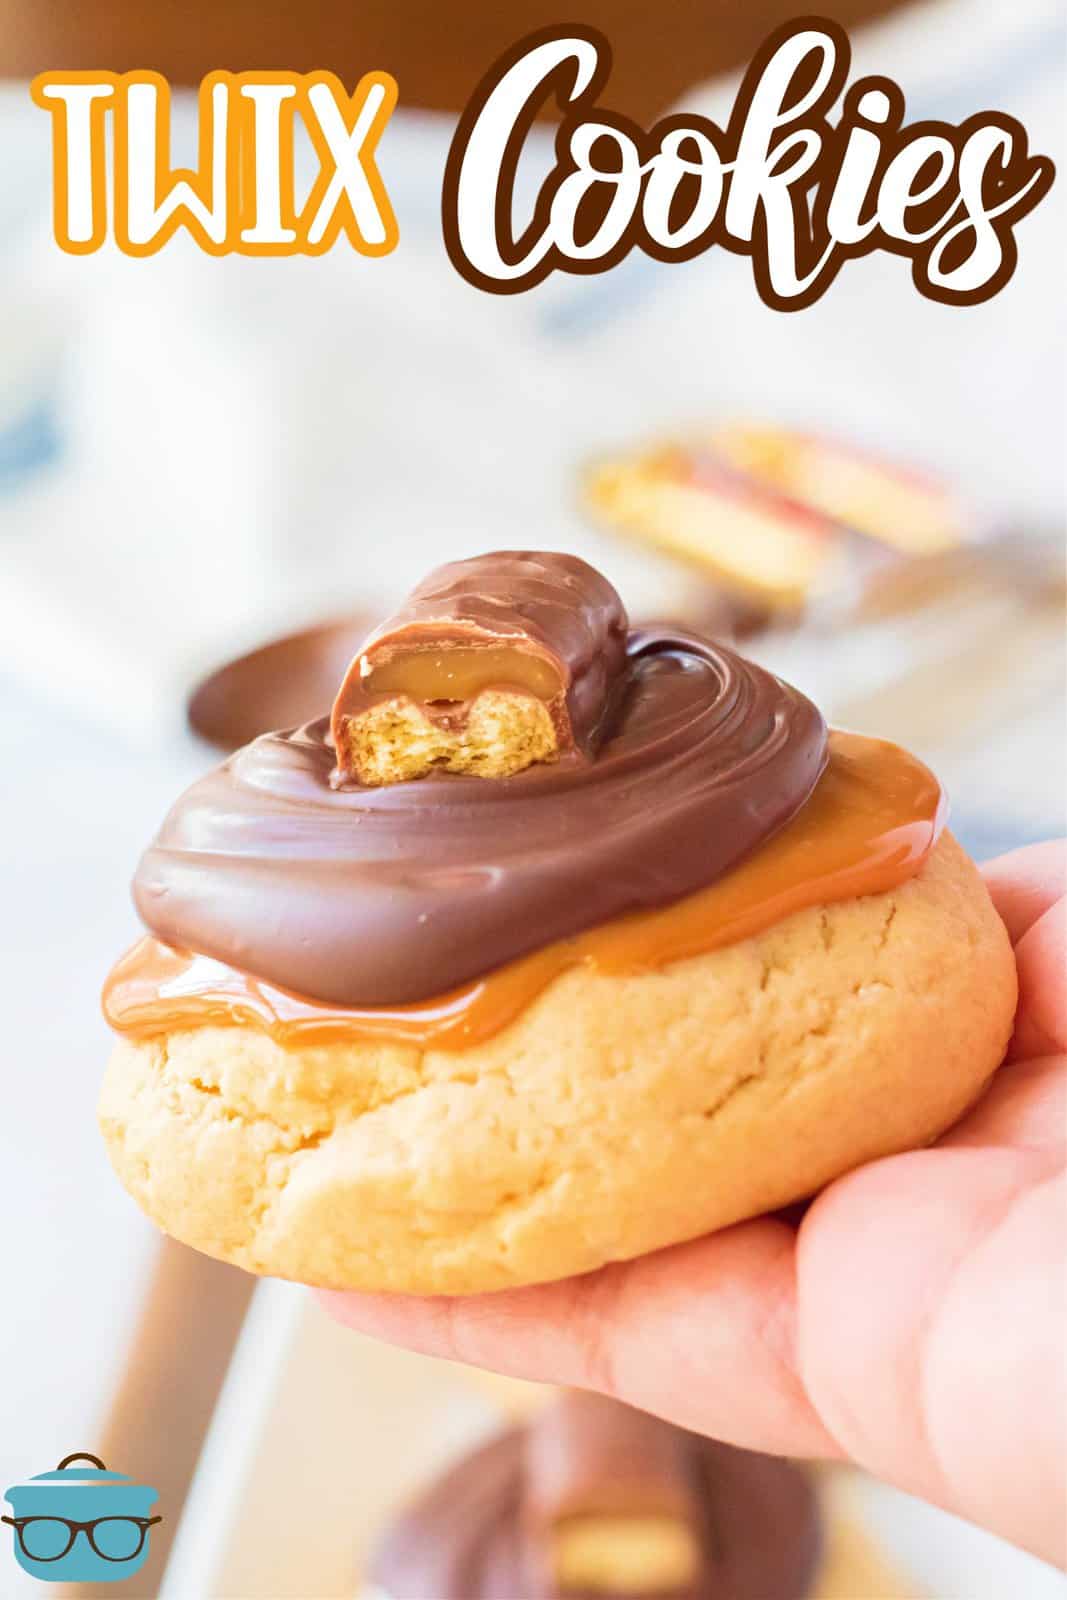 Hand holding up one of the Twix Cookies showing all the layers, Pinterest image.